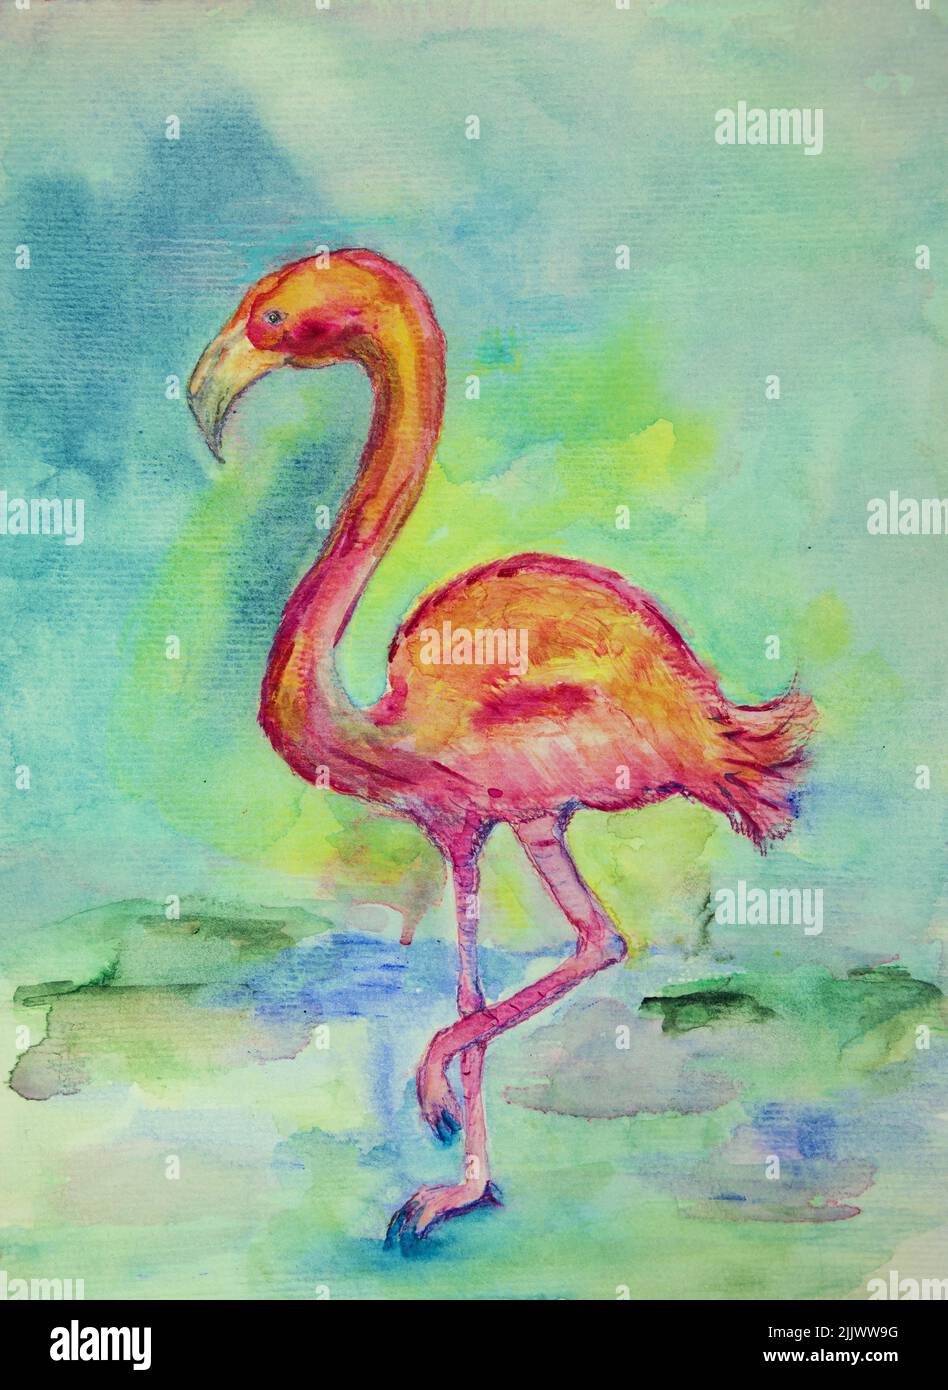 Pink flamingo. The dabbing technique near the edges gives a soft focus effect due to the altered surface roughness of the paper. Stock Photo